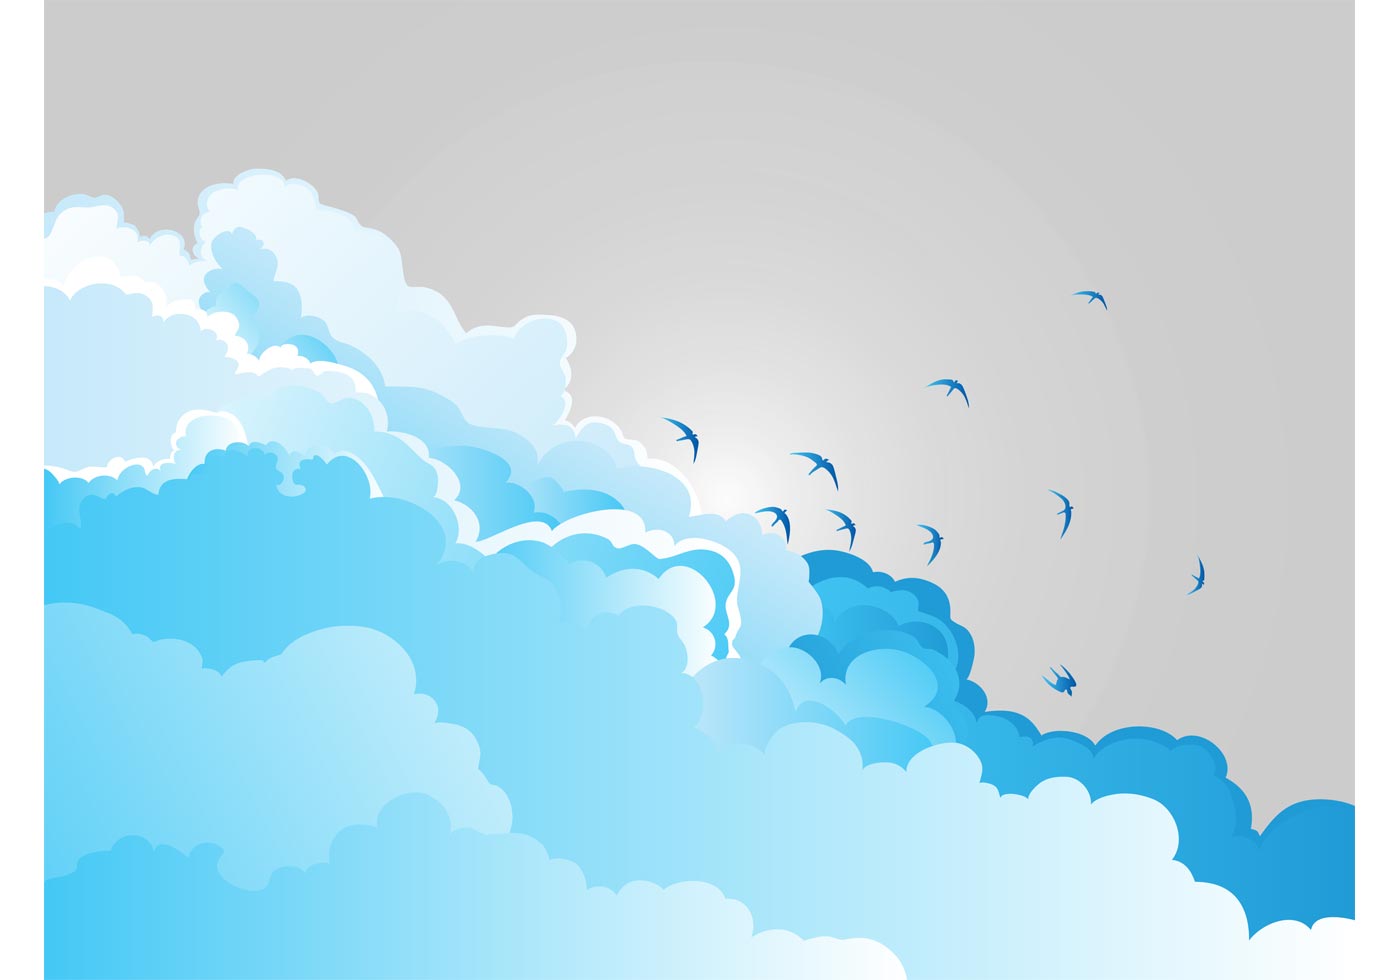 Clouds And Birds Download Free Vector Art, Stock